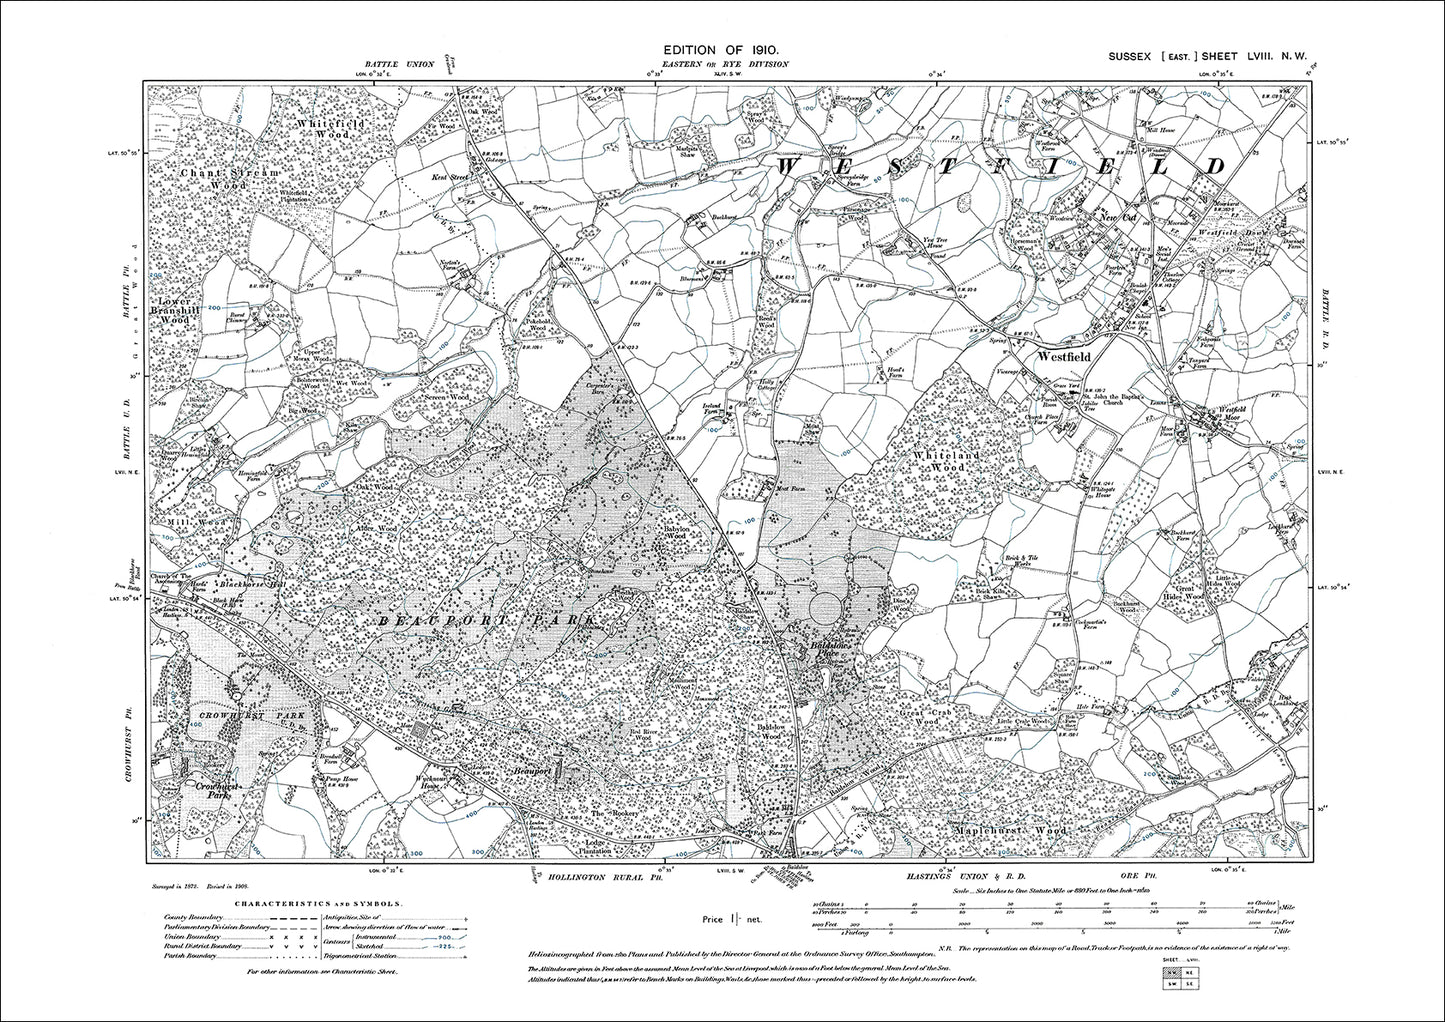 Westfield, Beaufort Park, old map Sussex 1910: 58NW